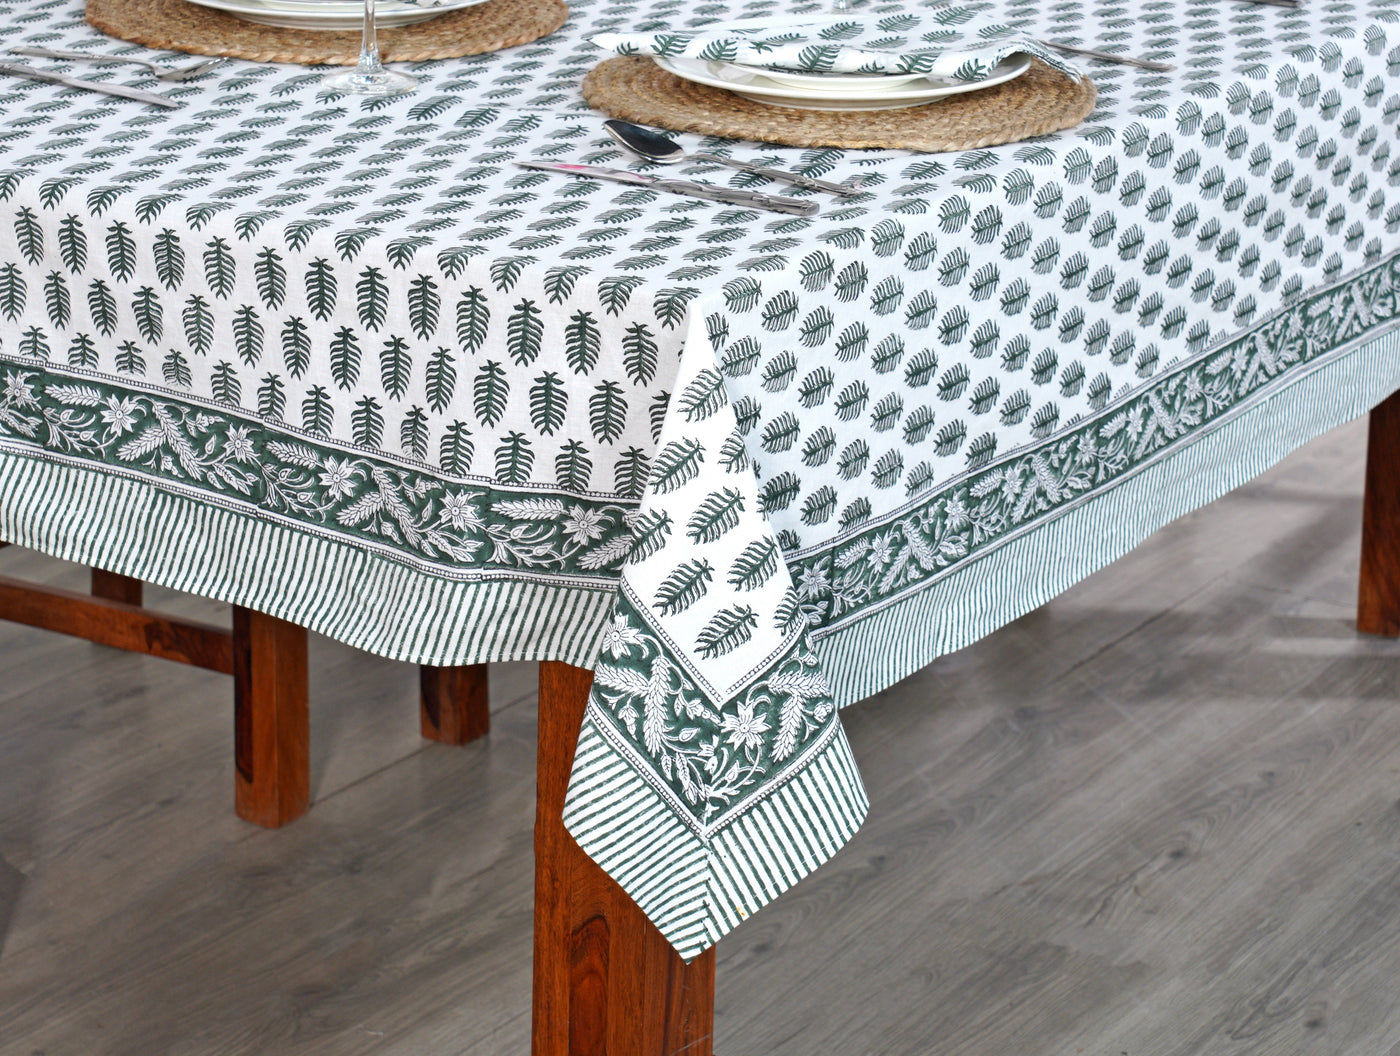 Fabricrush -Emerald Green Cotton Tablecloth, Handblock Print Floral Table Cloth for Kitchen Dining Linen I Thanksgiving, Christmas, Wedding, Fall Décor 4 Seater 60x60 Inches Square